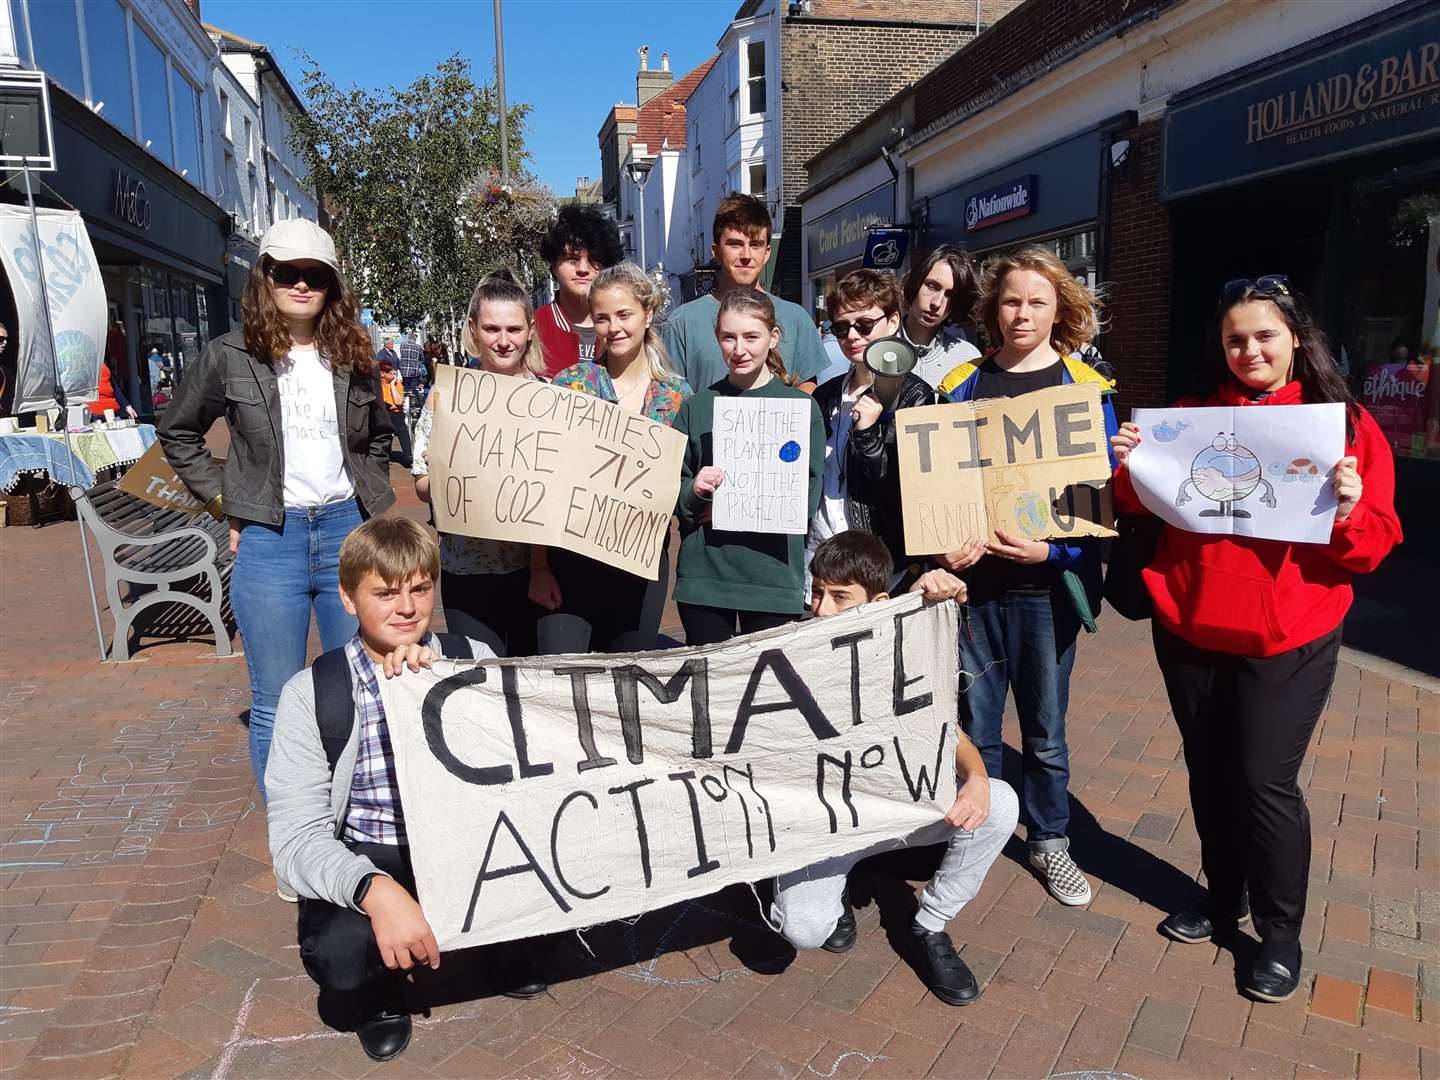 You Strike 4 Climate: These students missed school to attend the march